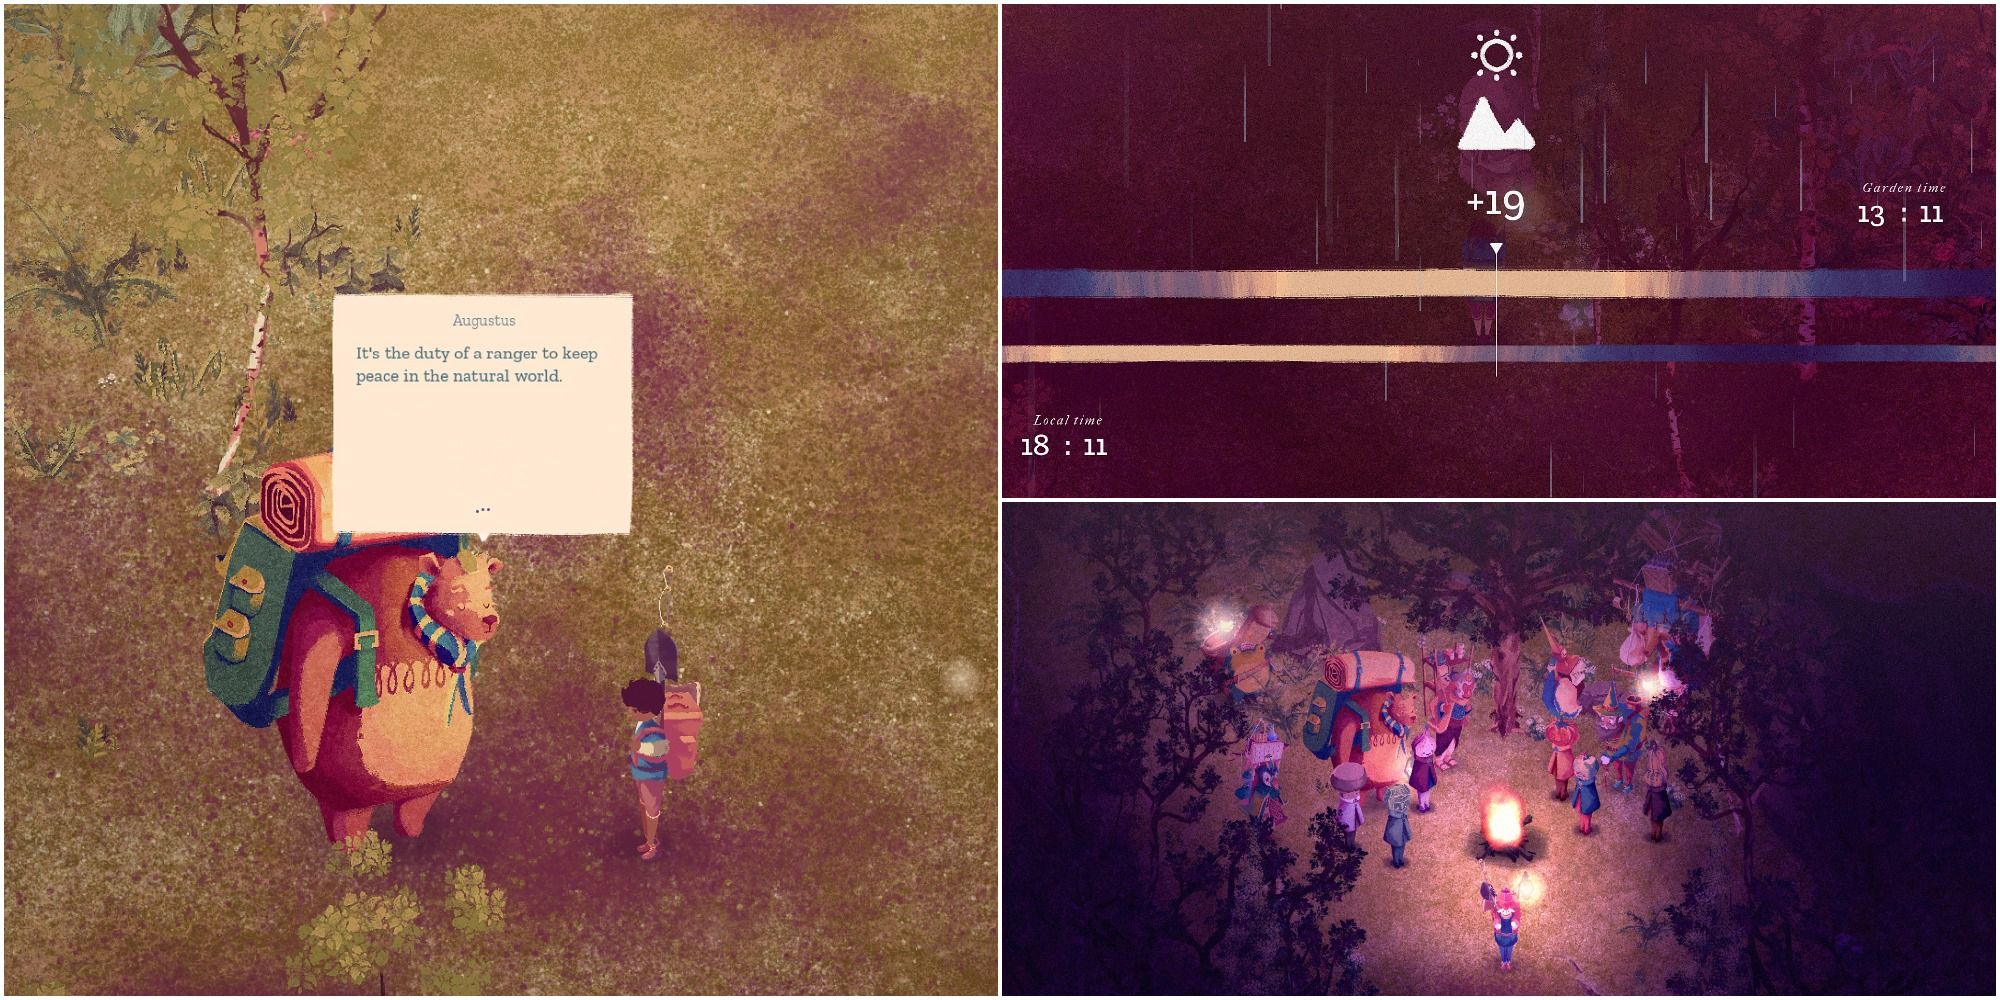 Split image a person chatting with a bear, attending a late-night party, and a time progression screen from the game The Garden Path